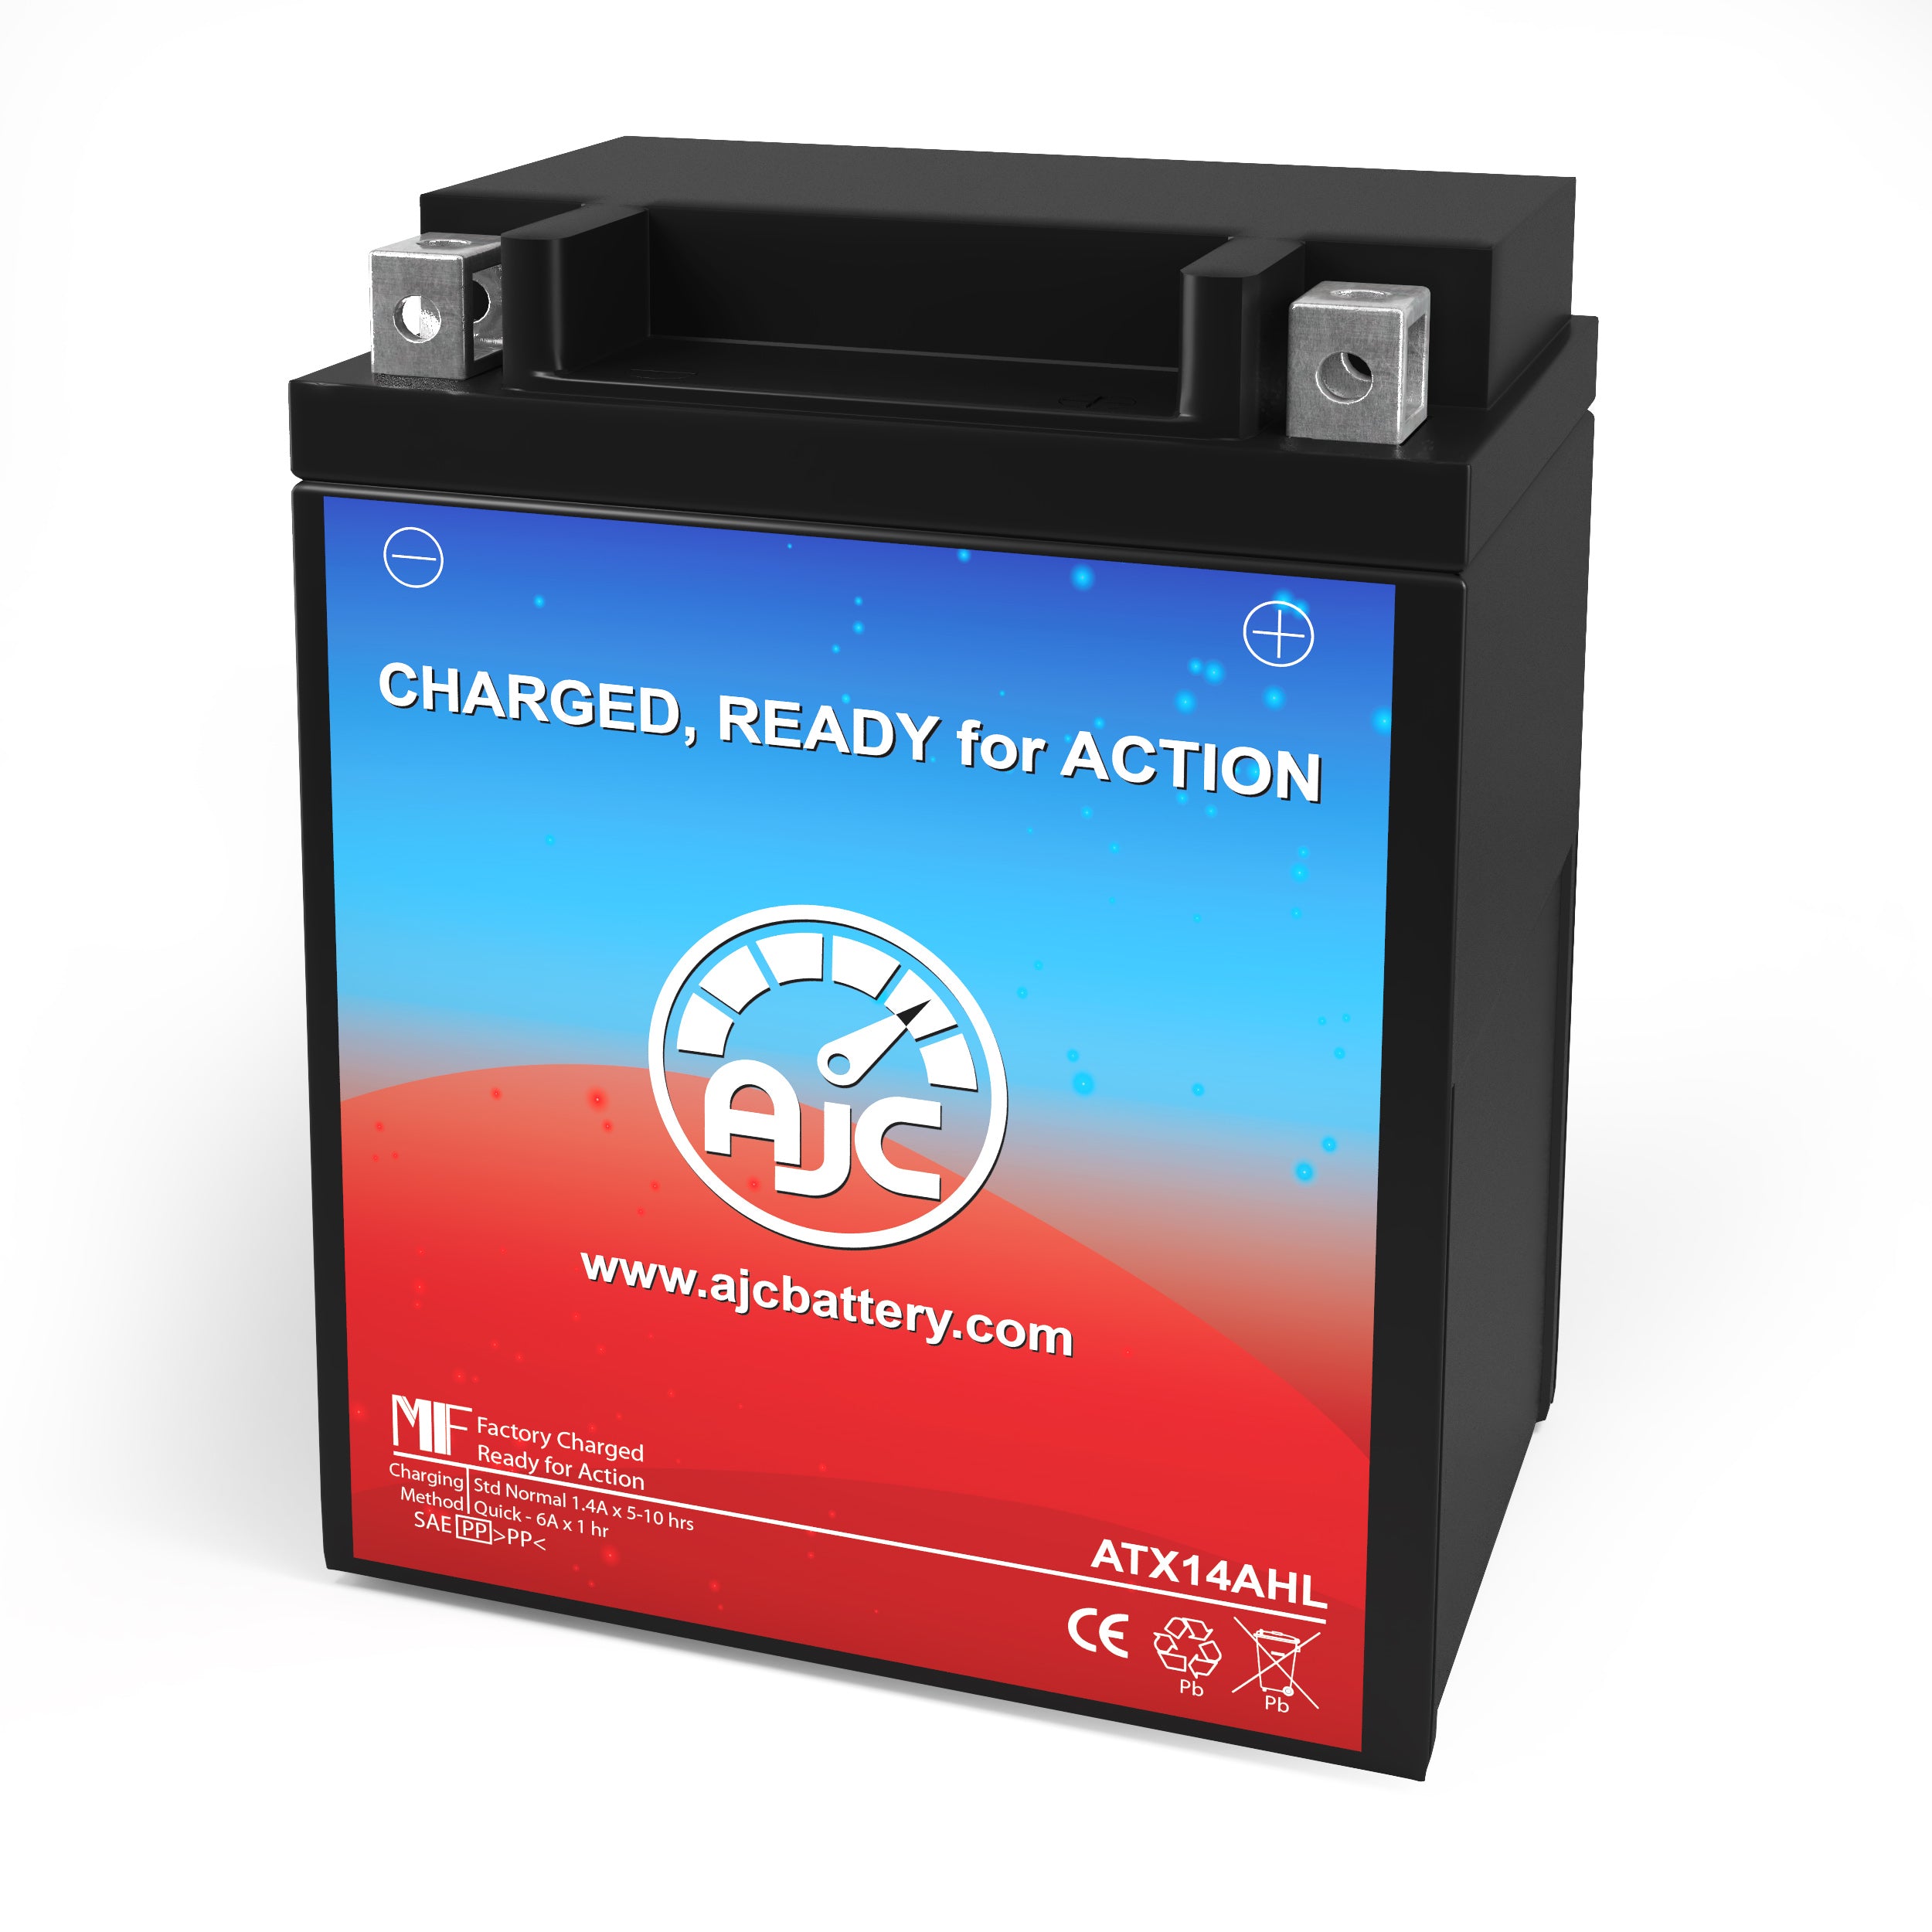 Duralast GTX14AHL-BSFP 12V Powersports Replacement Battery - This Is an AJC Brand Replacement - image 1 of 4